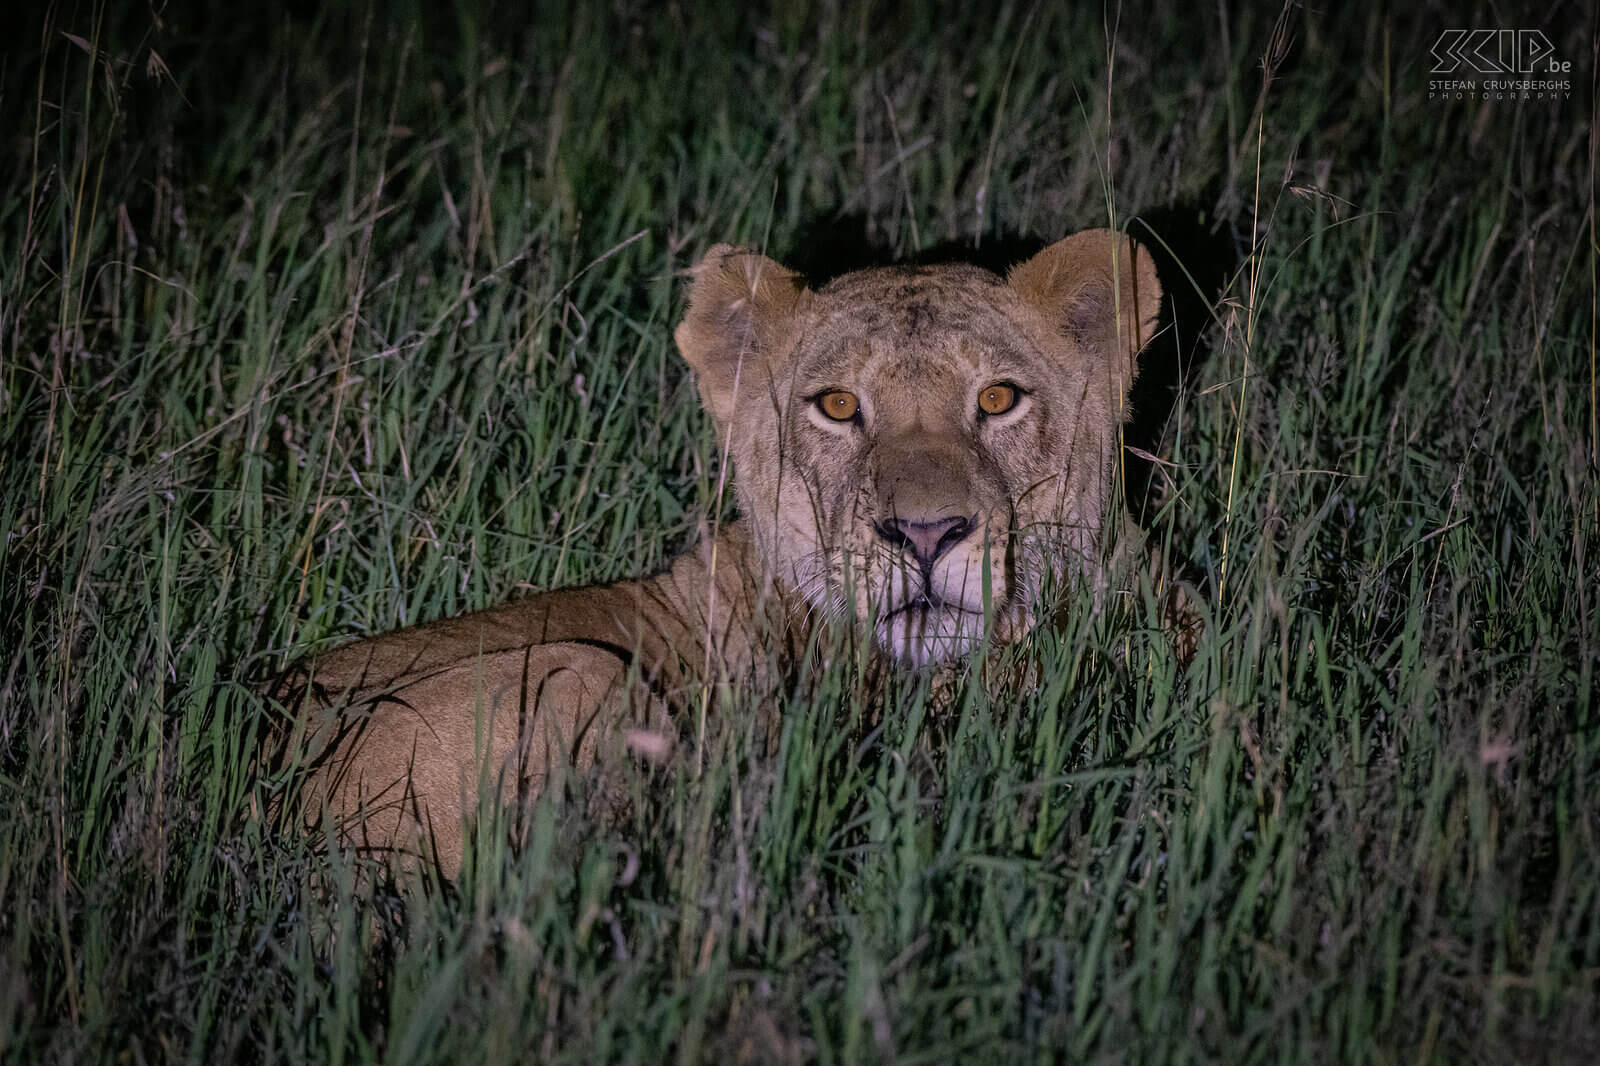 Solio - Young lion During a final night game drive in Solio we were able to follow a lioness with some cubs. Night game drives in Solio take place in the Ranch part. It was a fantastic end to our trip. Stefan Cruysberghs